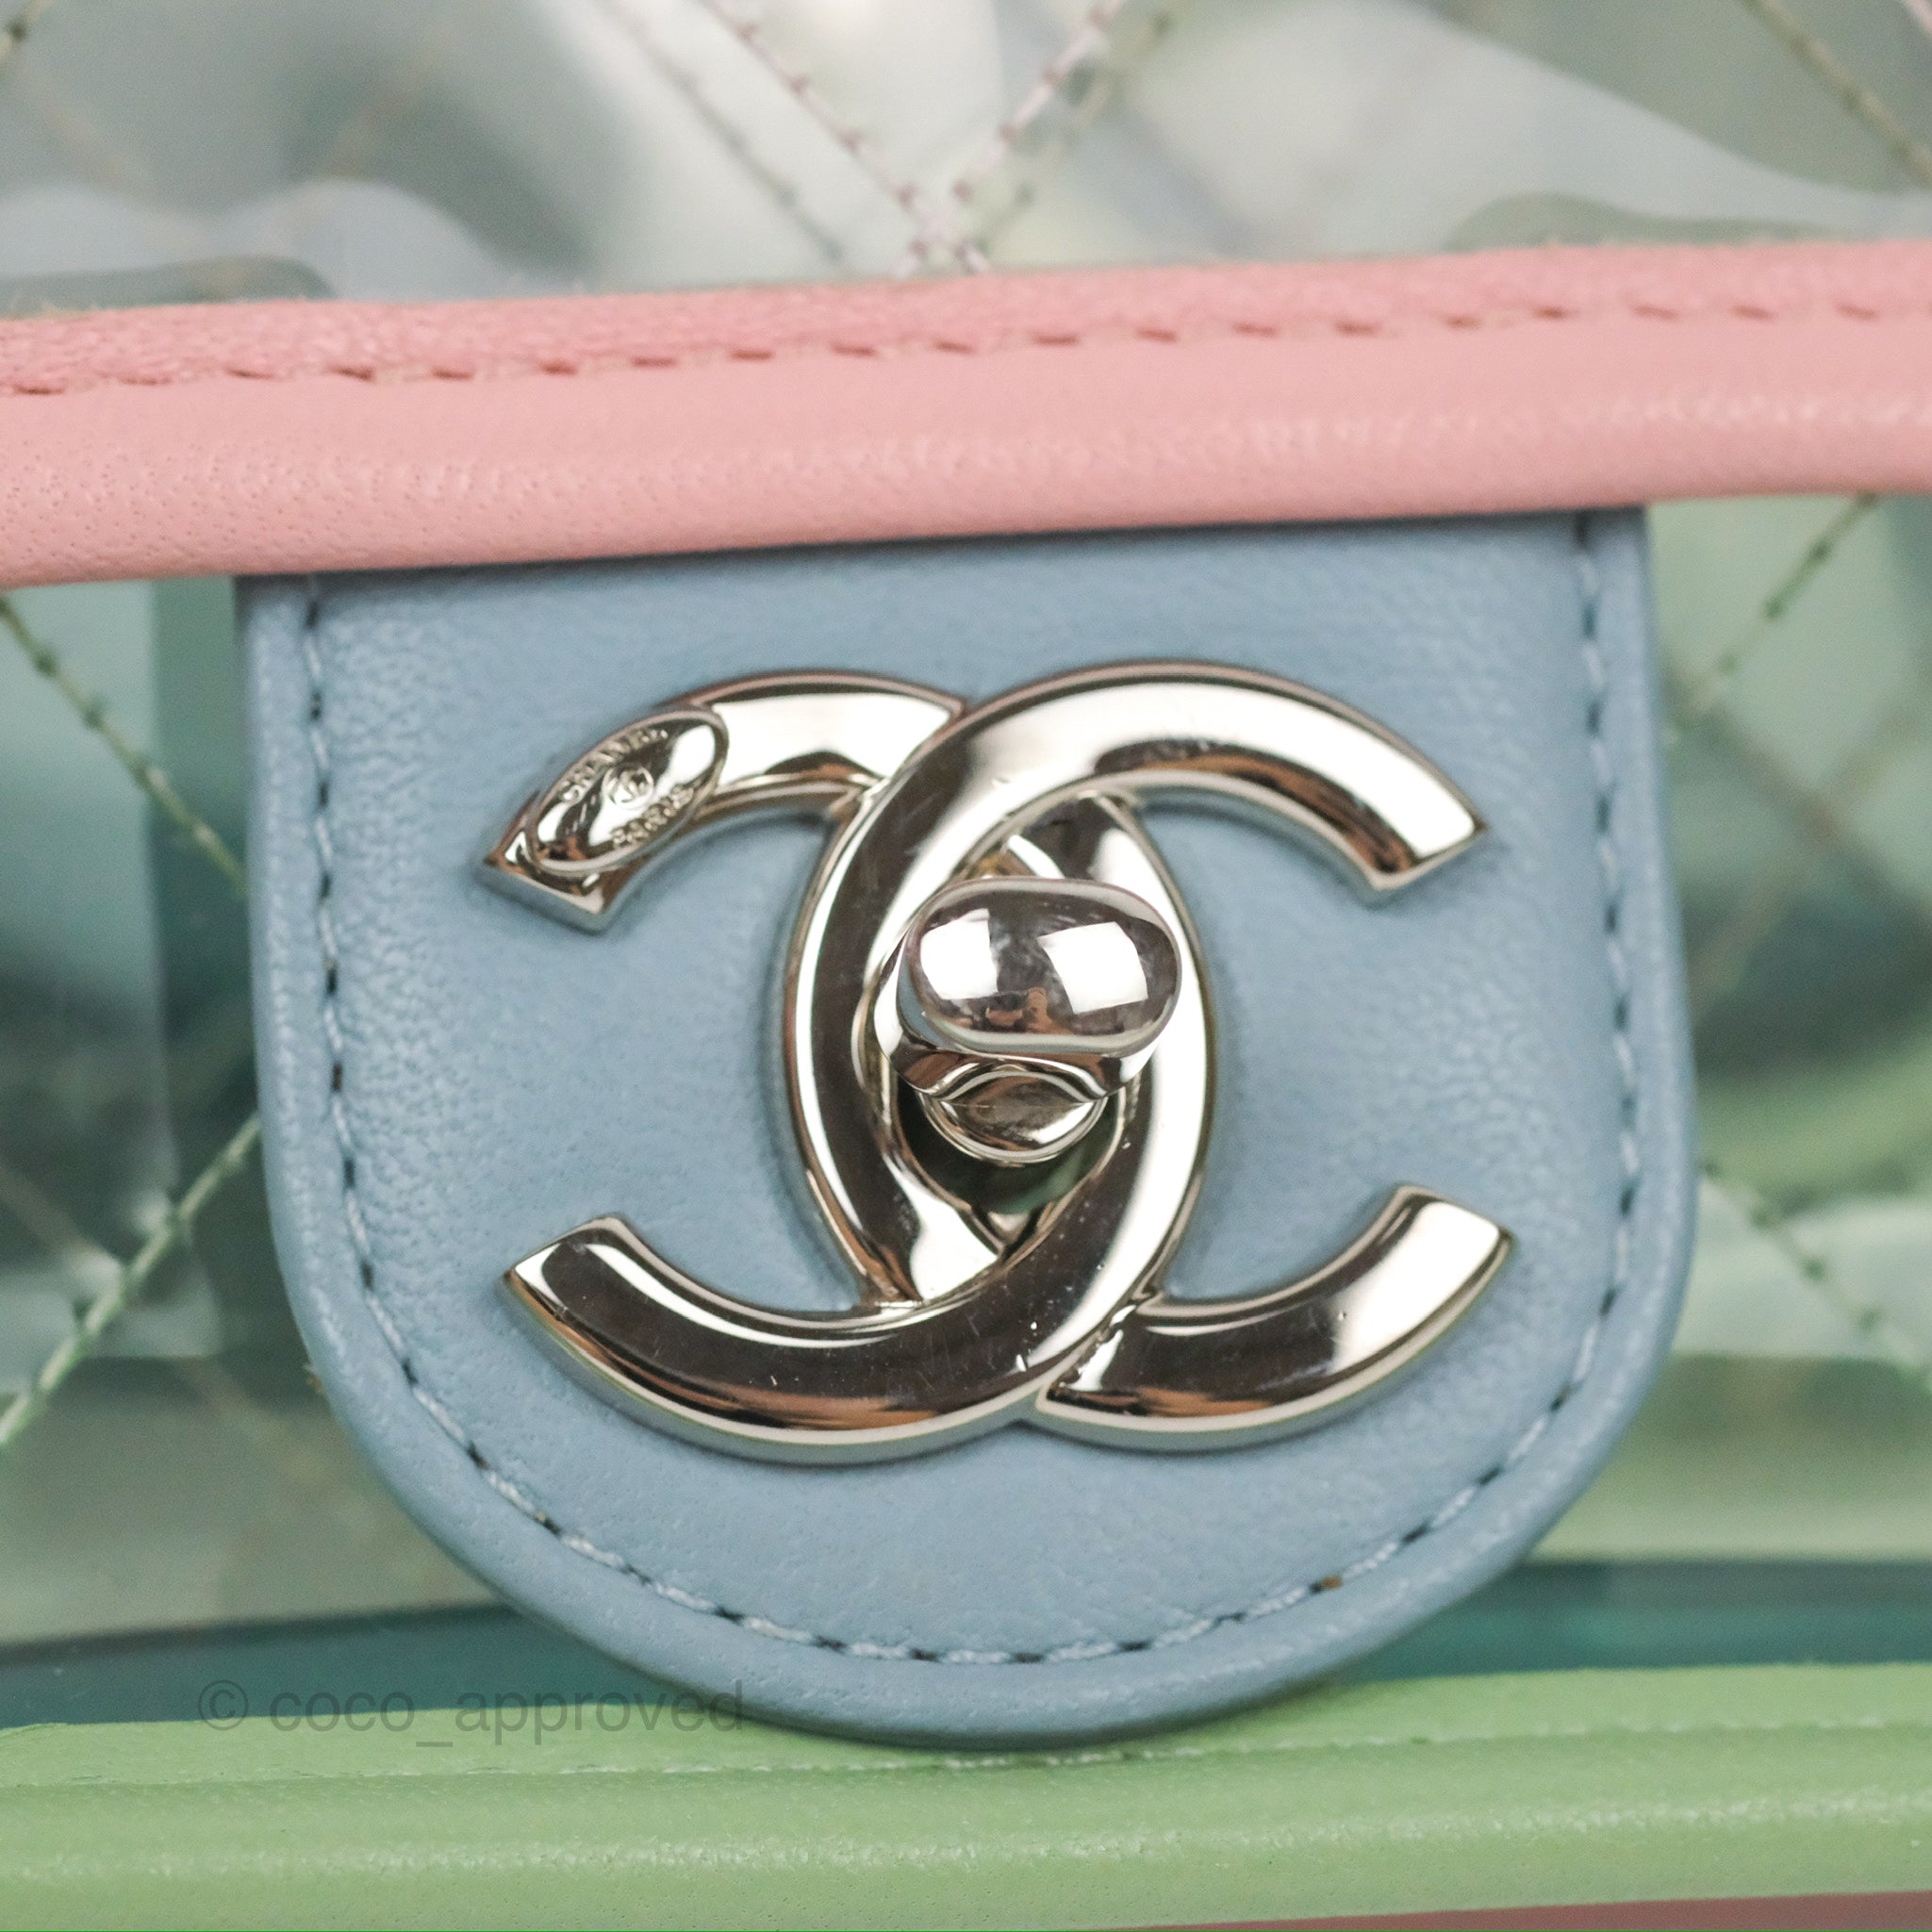 This is the Year of the Perfect Pink Chanel Classic Flap - PurseBop